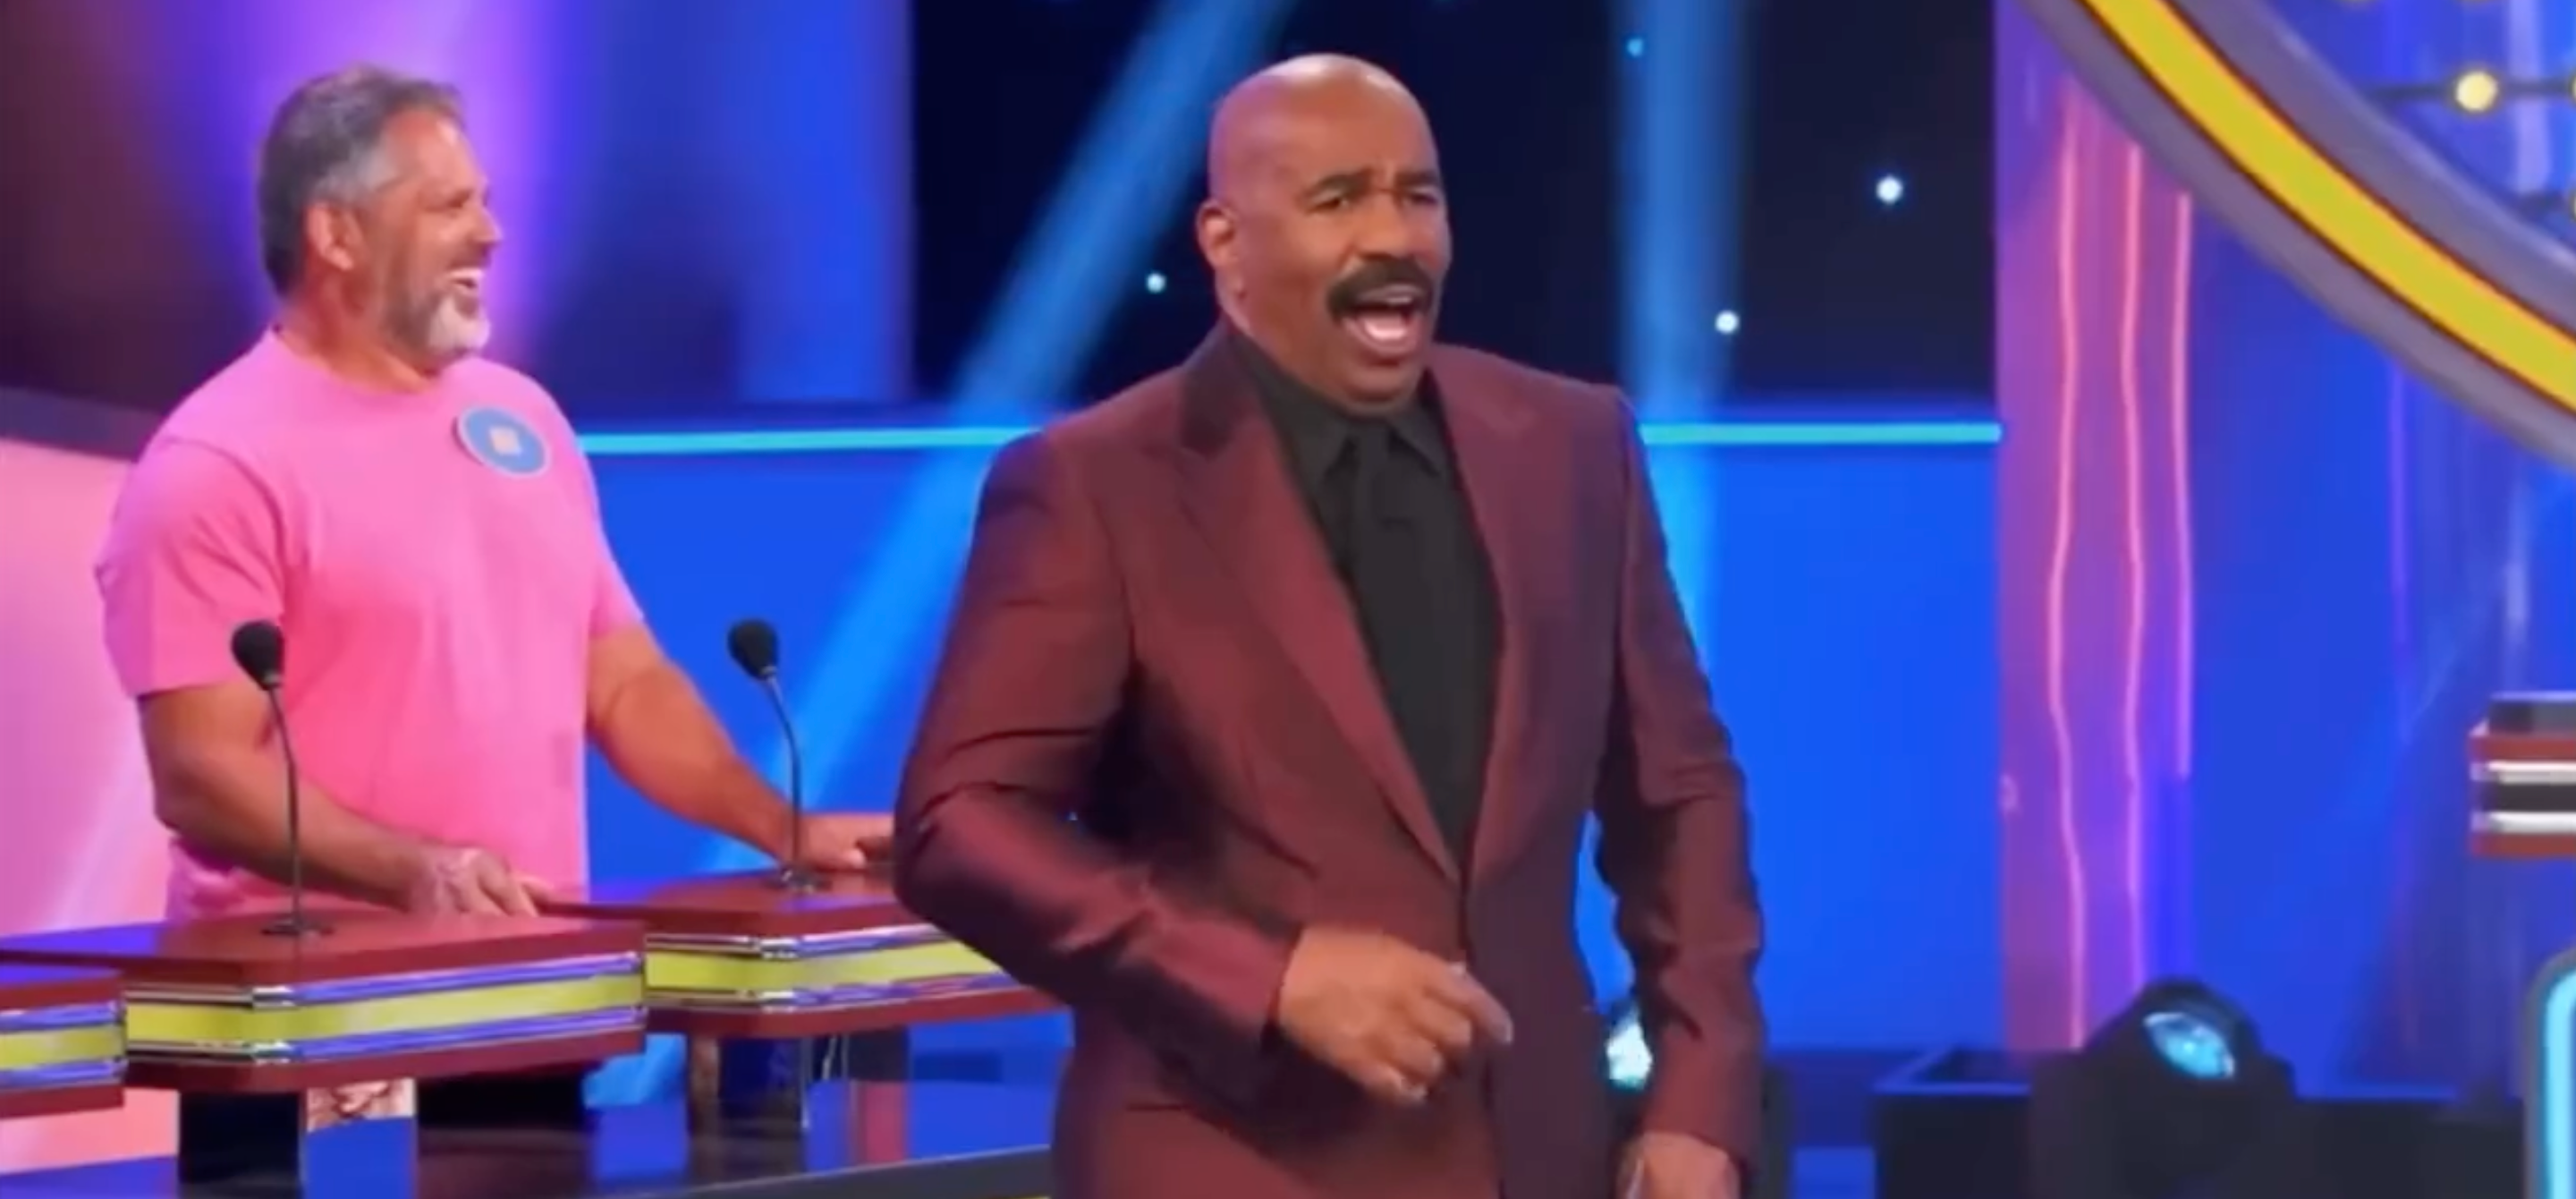 7 Times Steve Harvey And Jackass' Cast Made Comedy Gold During